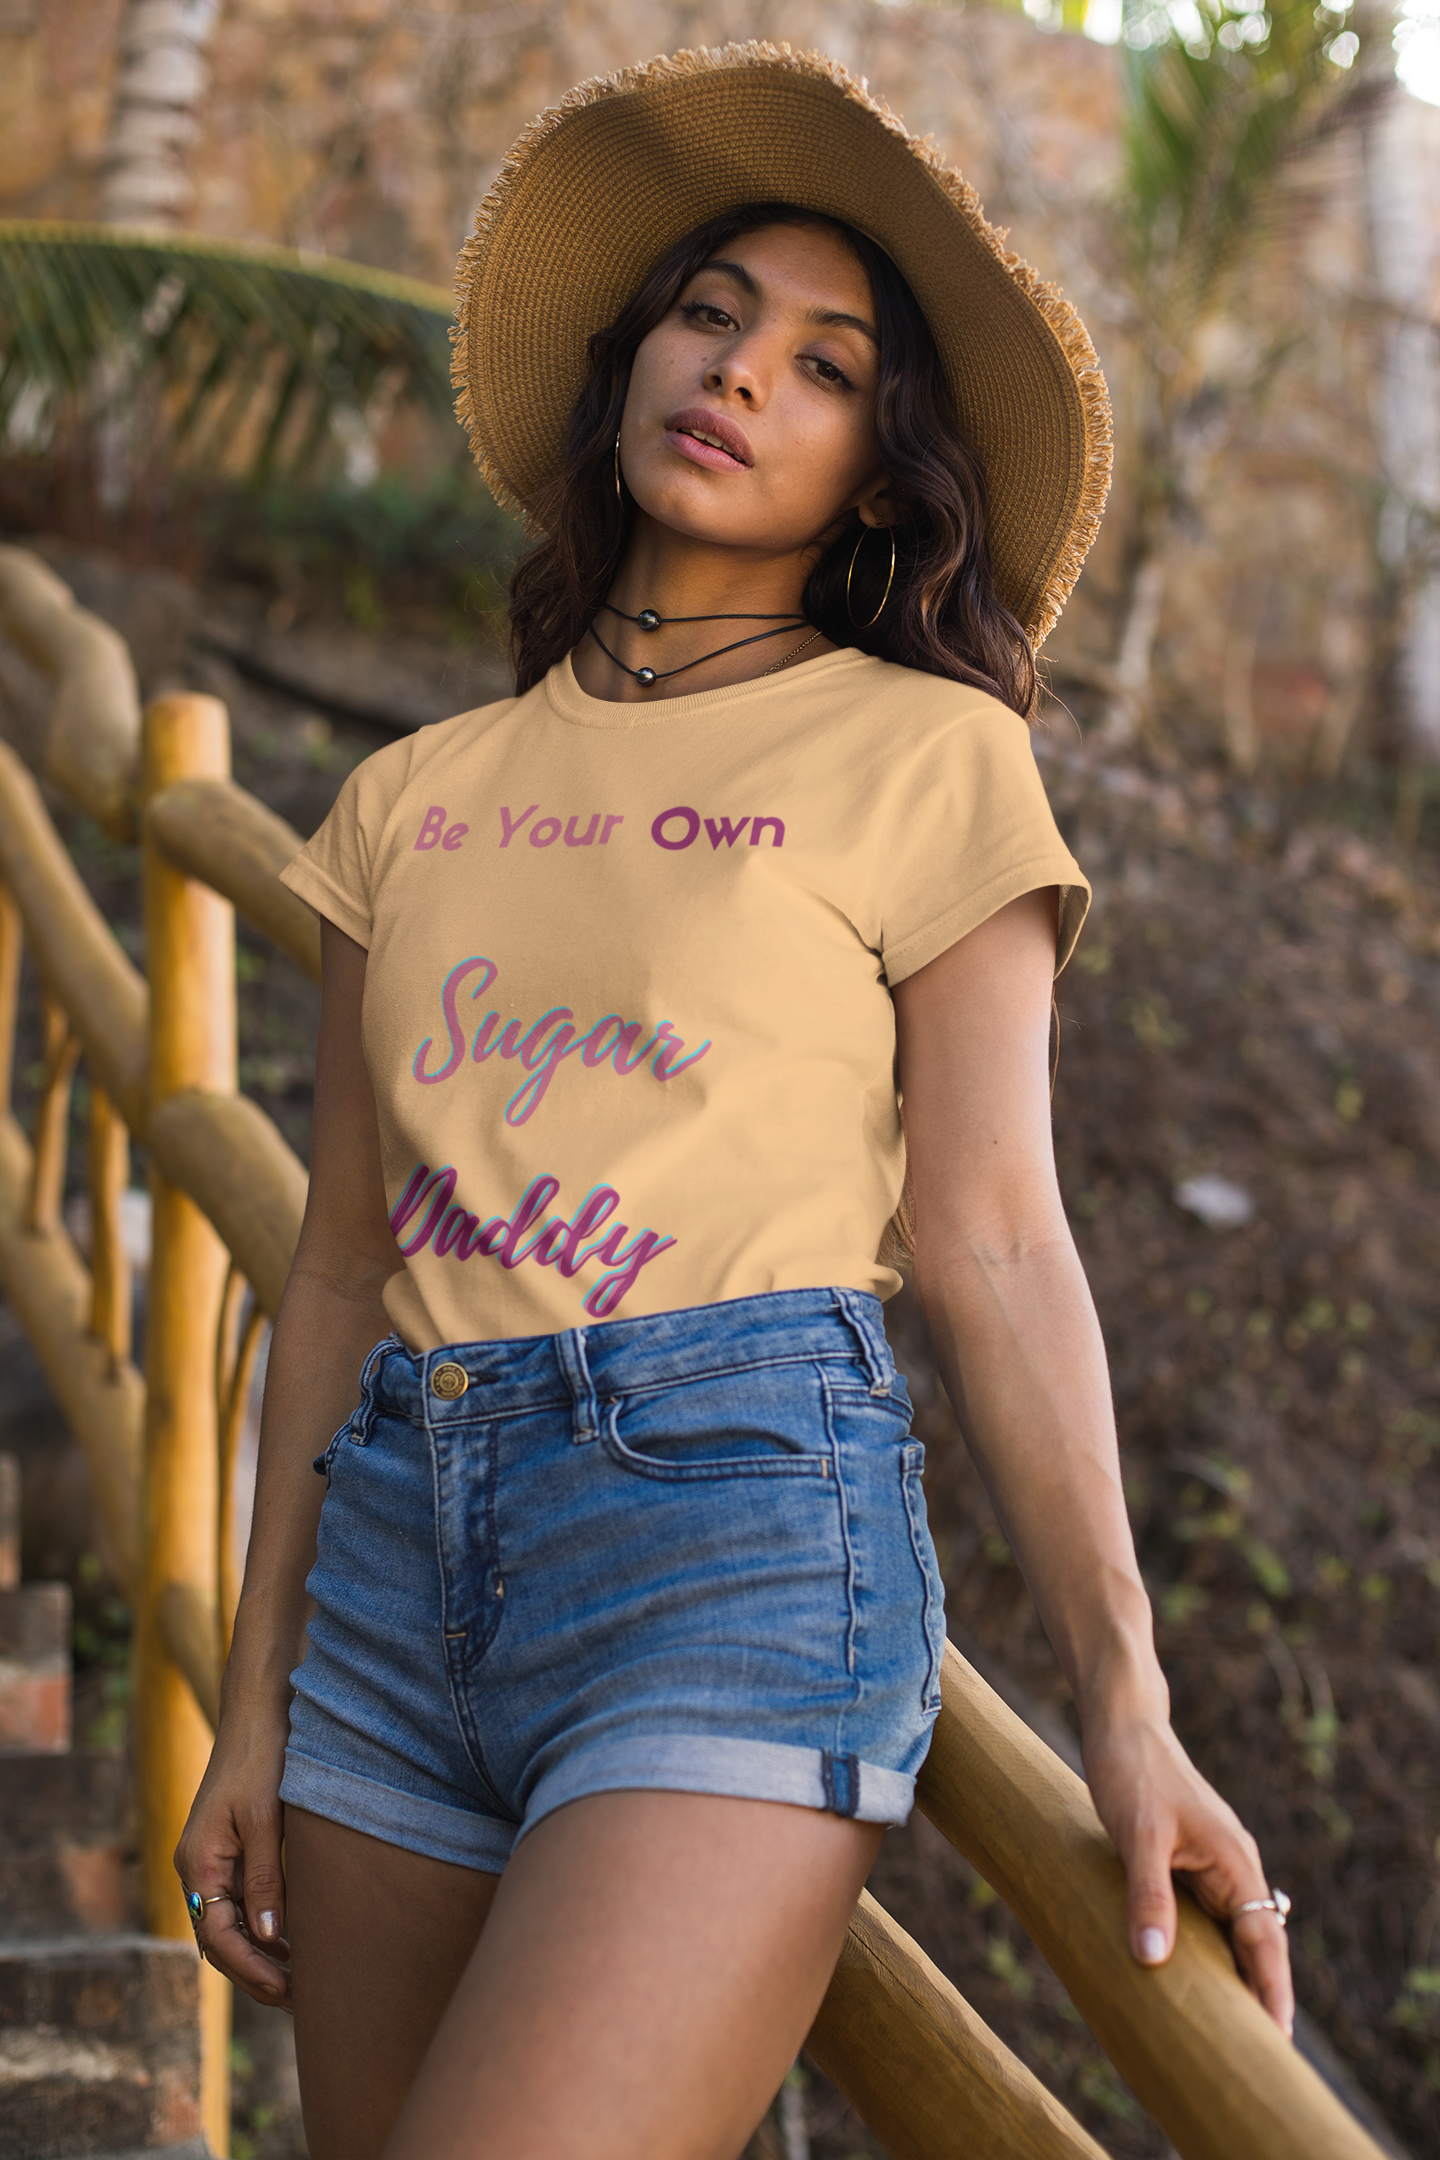 Be Your Own Sugar Daddy Tee 4